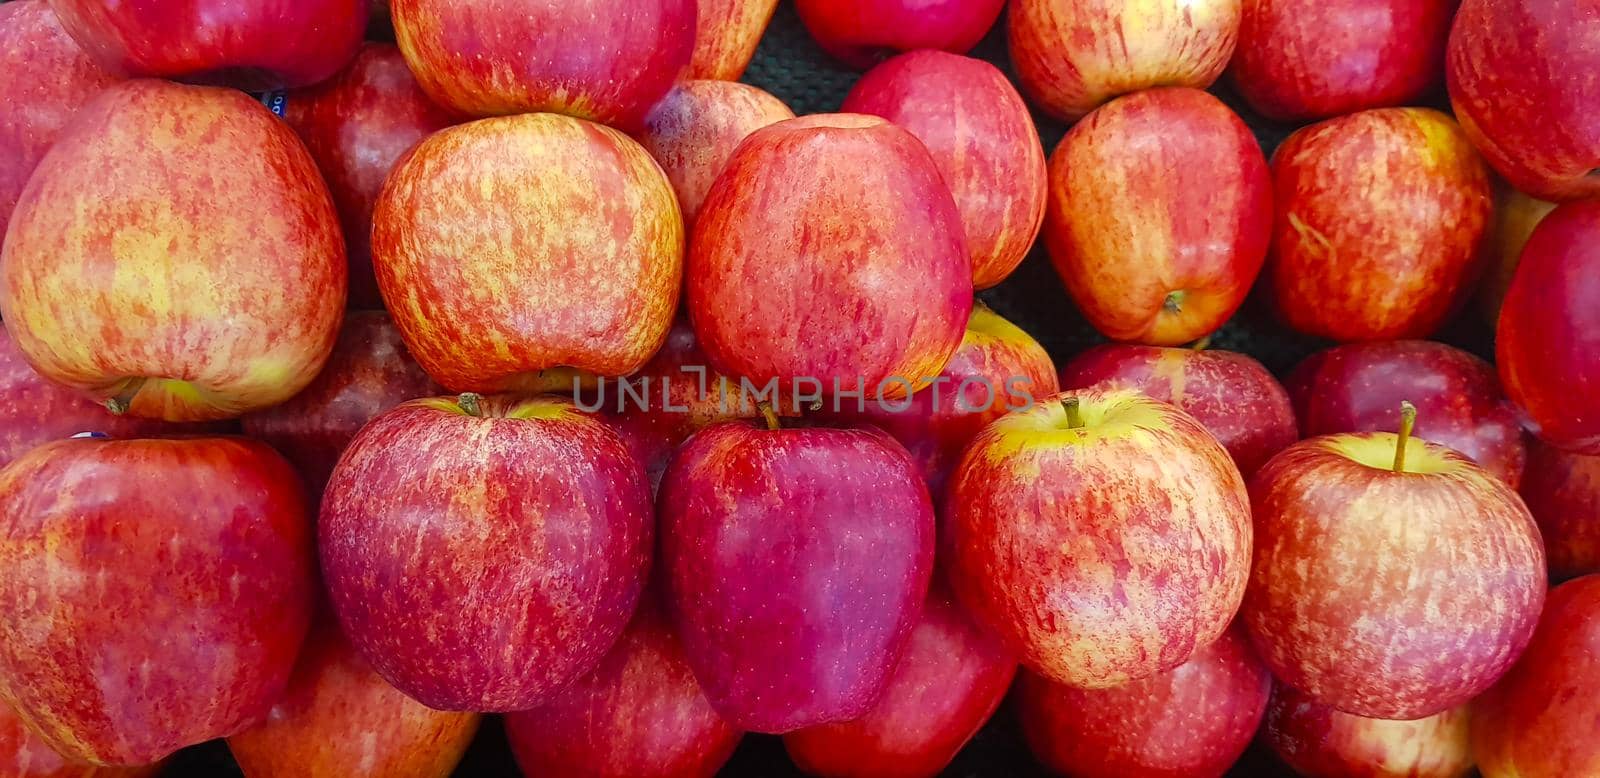 Fresh red apples good for multimedia background group of red ripe apples by antoksena